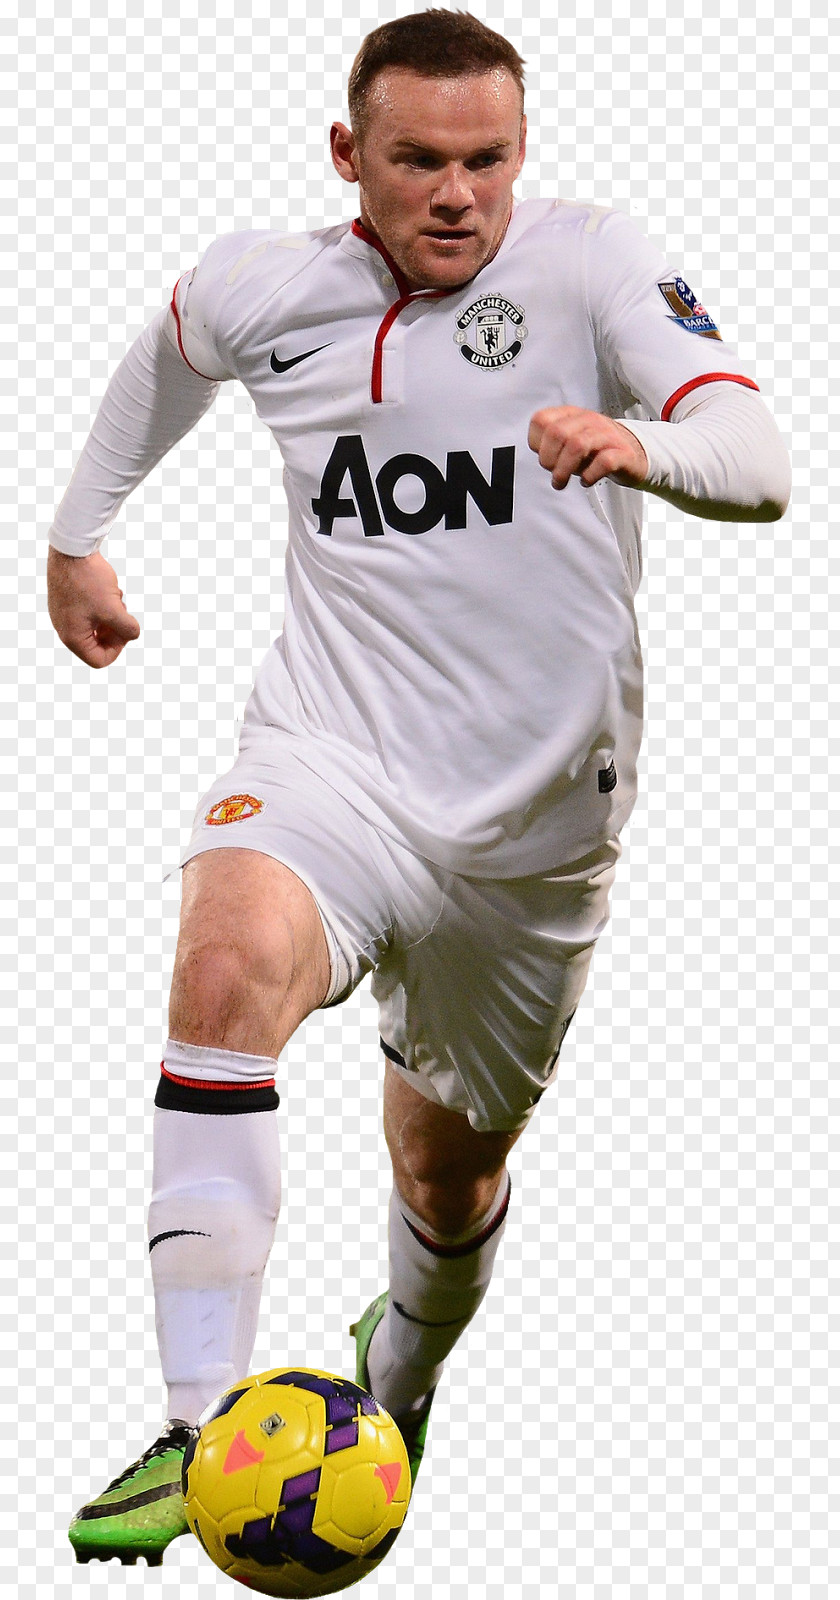 Wayne Rooney Football Player Shoe Outerwear PNG